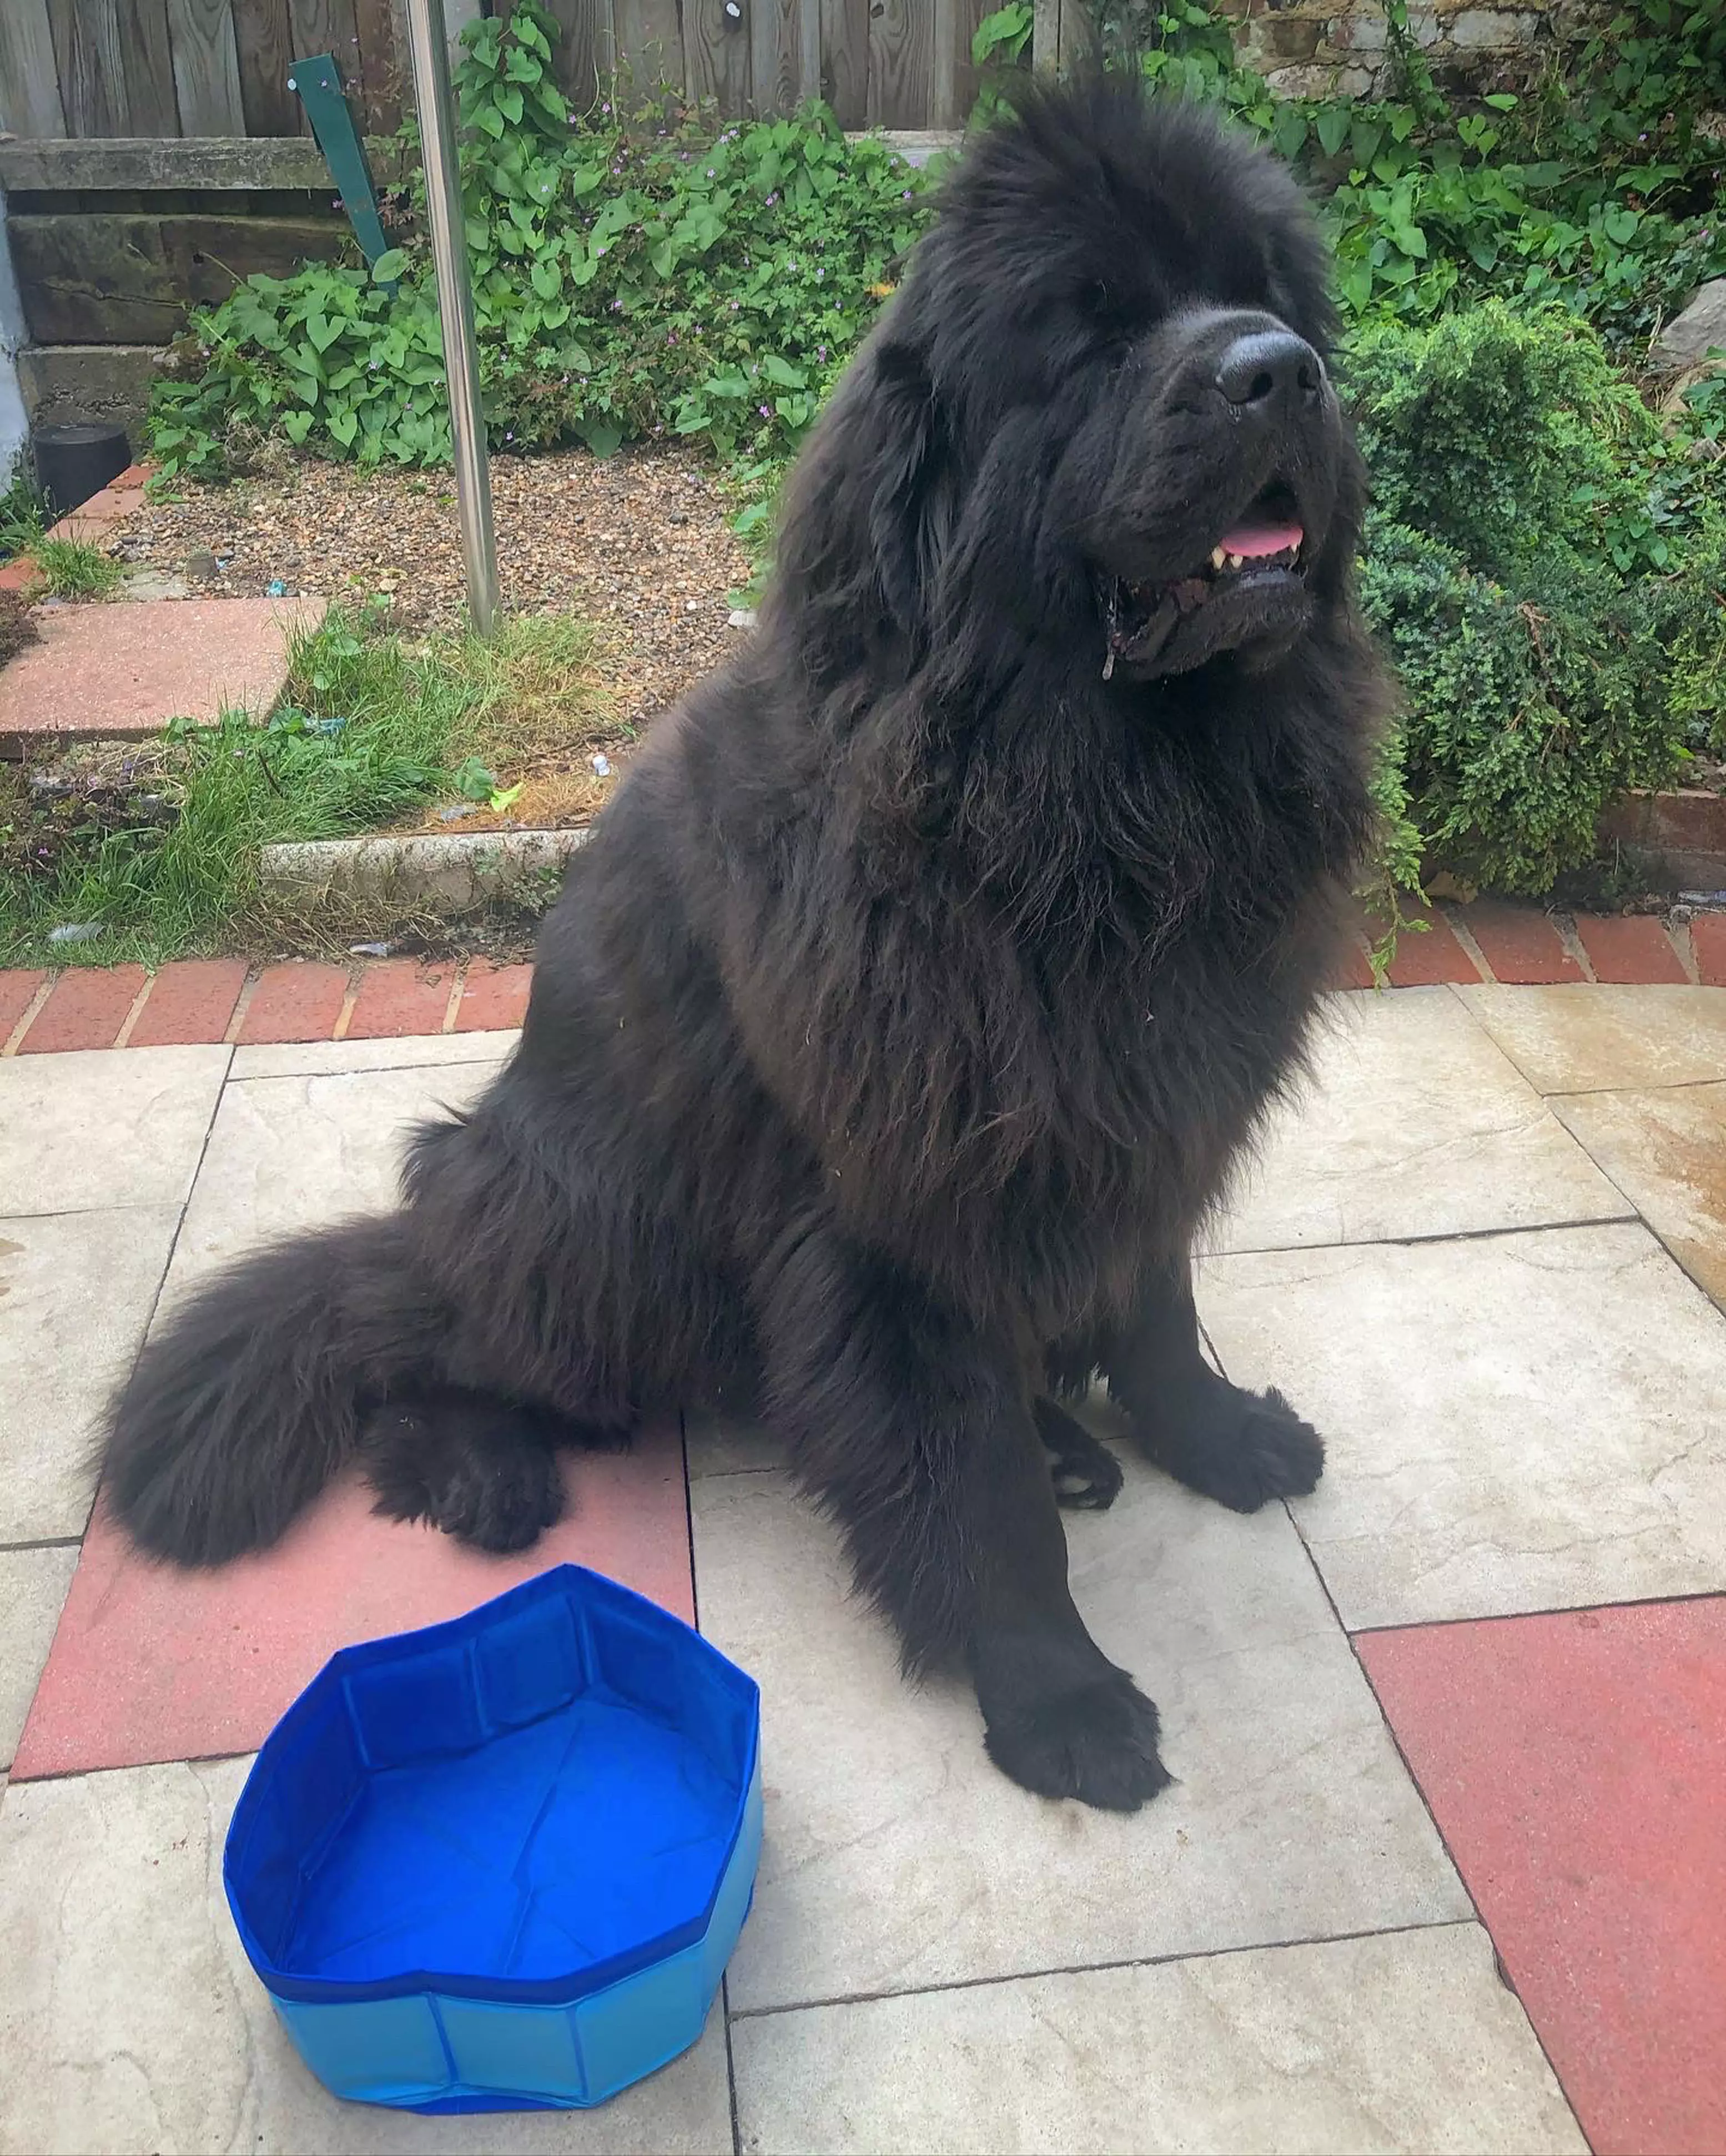 The two-year-old Newfoundland Darcy loves splashing around in water - but her pool was too small for a Chihuahua (